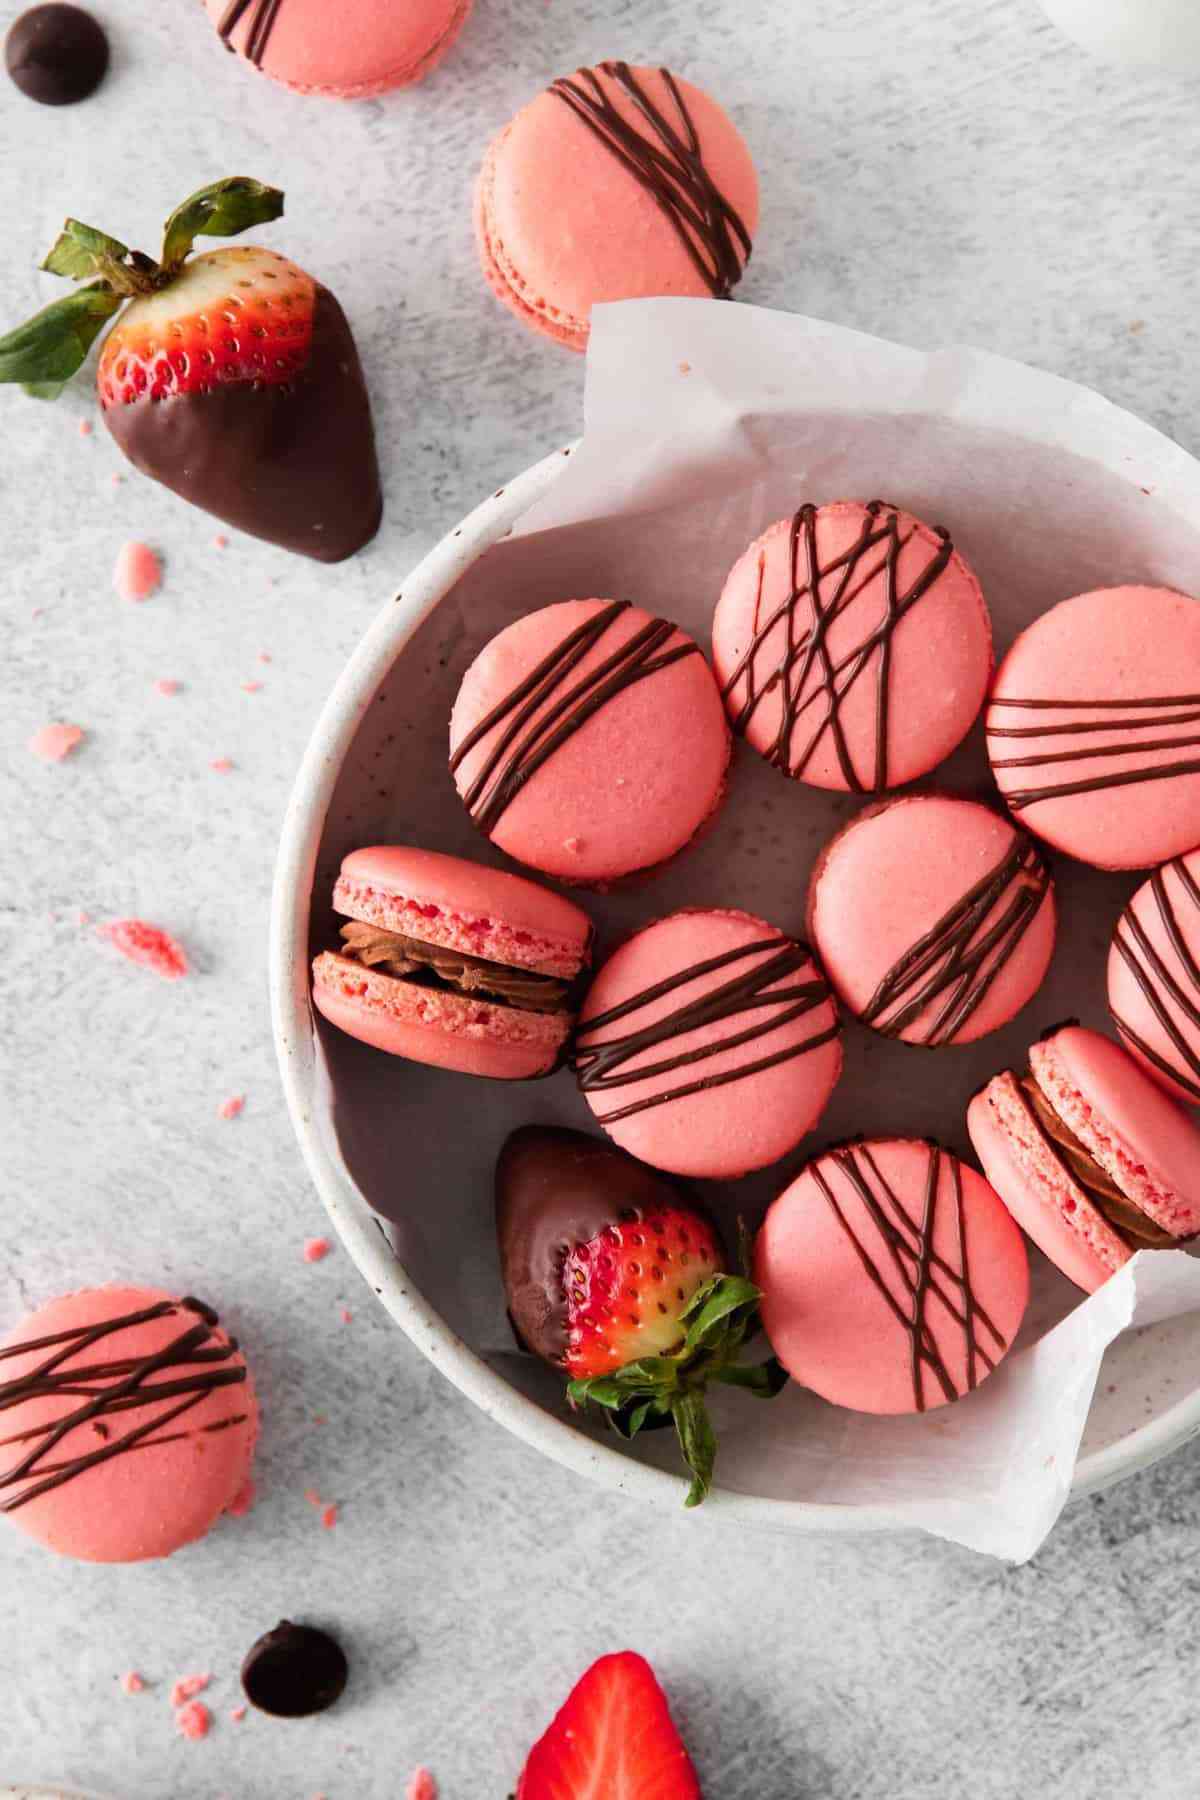 Bowl full of pink macarons with chocolate drizzle.